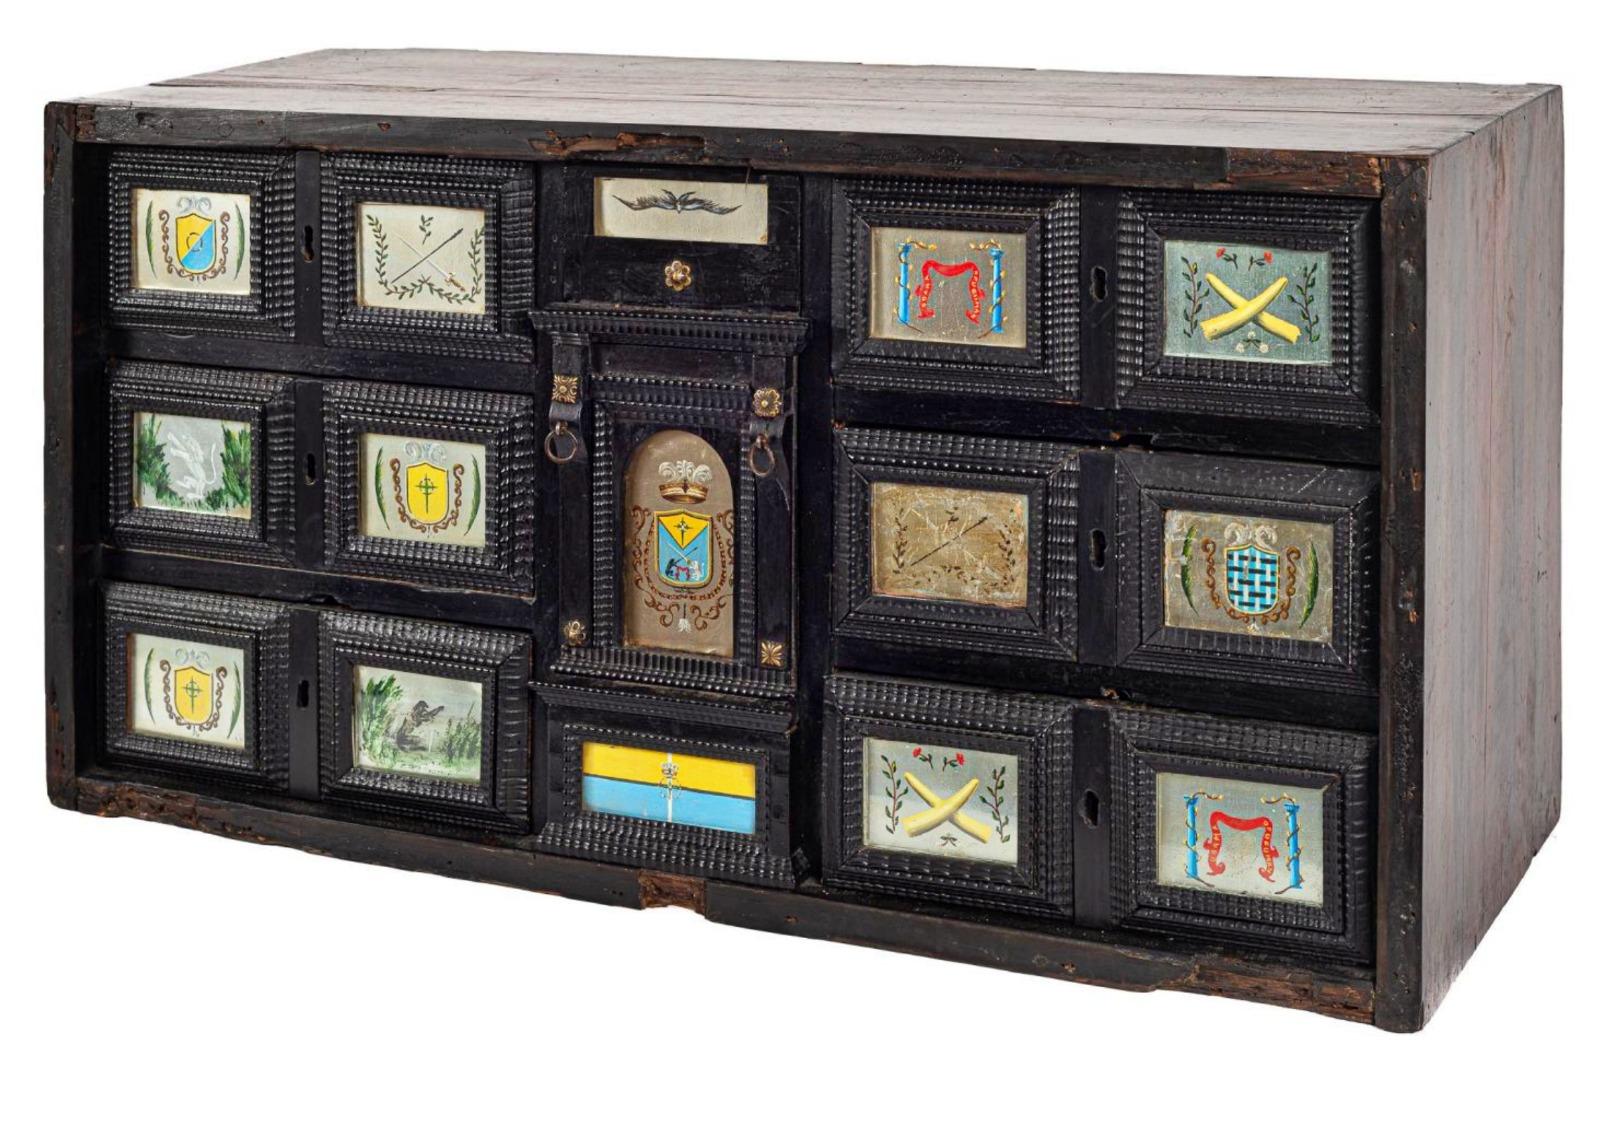 Flemish casket-bin, 17th century
In walnut wood and ebonized. Nine drawers with painted mirror fronts.
38 x 73.5 x 30 cm.
good condition.